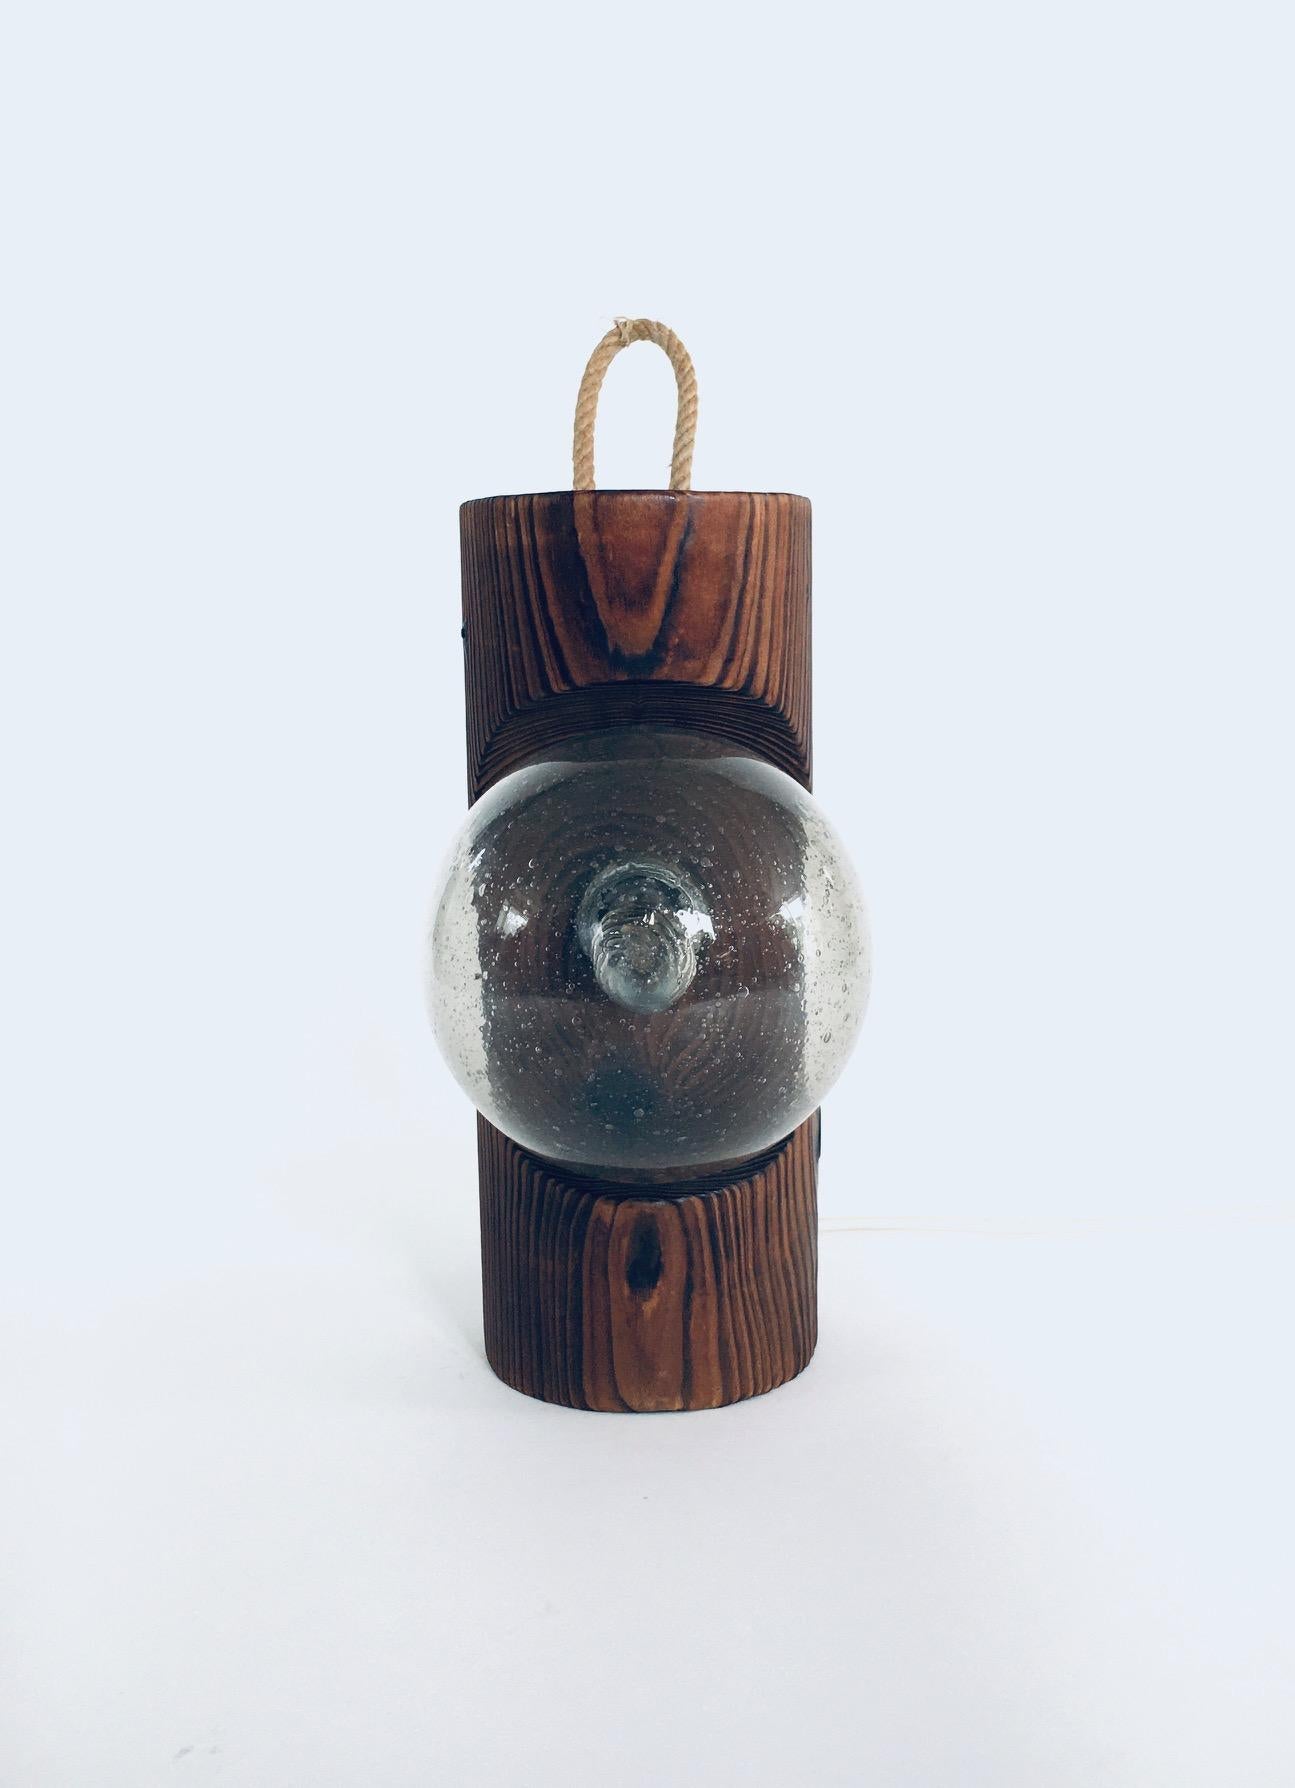 Glass Brutalist Design Wood Table or Wall Lamp by Temde Leuchten, Switzerland 1960's For Sale